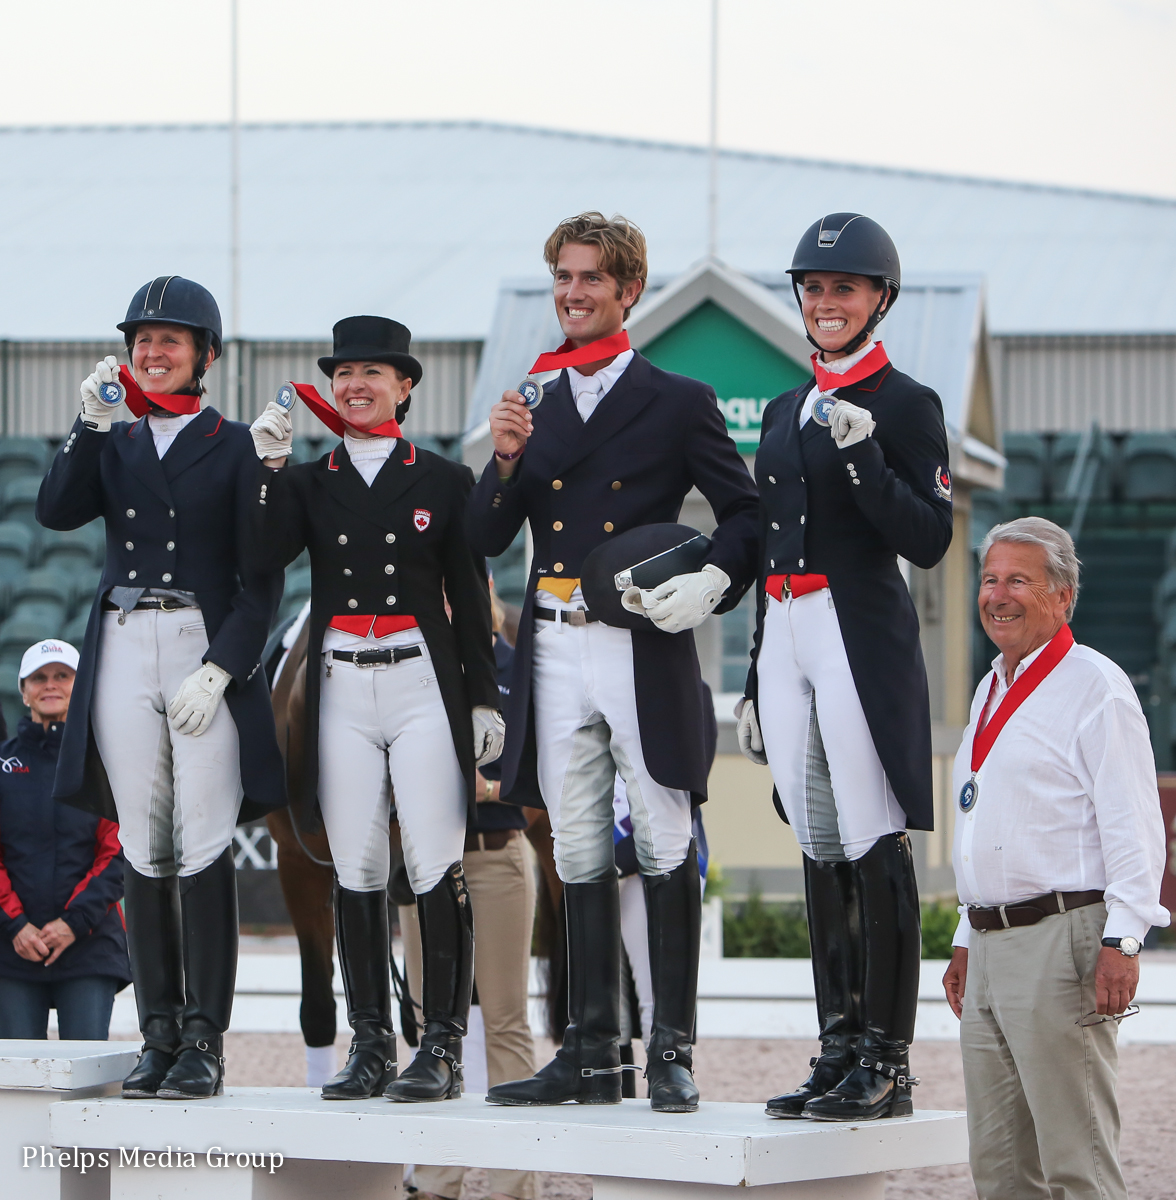 Canada Team 1 - Diane Creech, Belinda Trussell, Chris von Martels, Megan Lane and chef d'equipe Volker Moritz - show off their silver medals at the Stillpoint Farm Nations Cup CDIO3* in Wellington, Florida